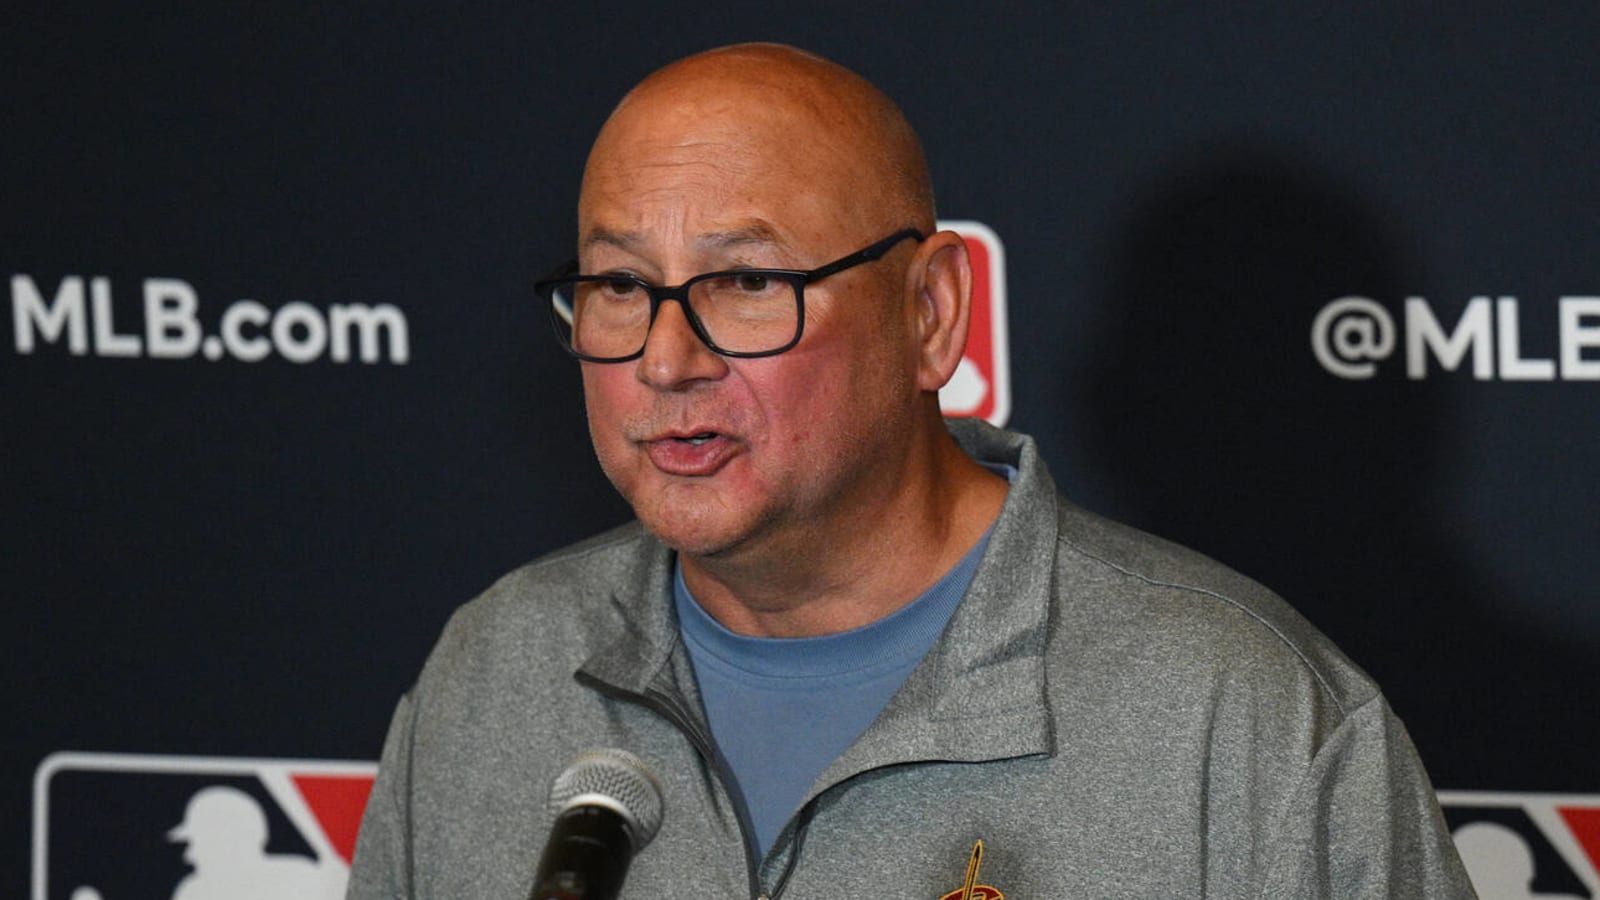 Terry Francona broke a tooth while preparing for speech